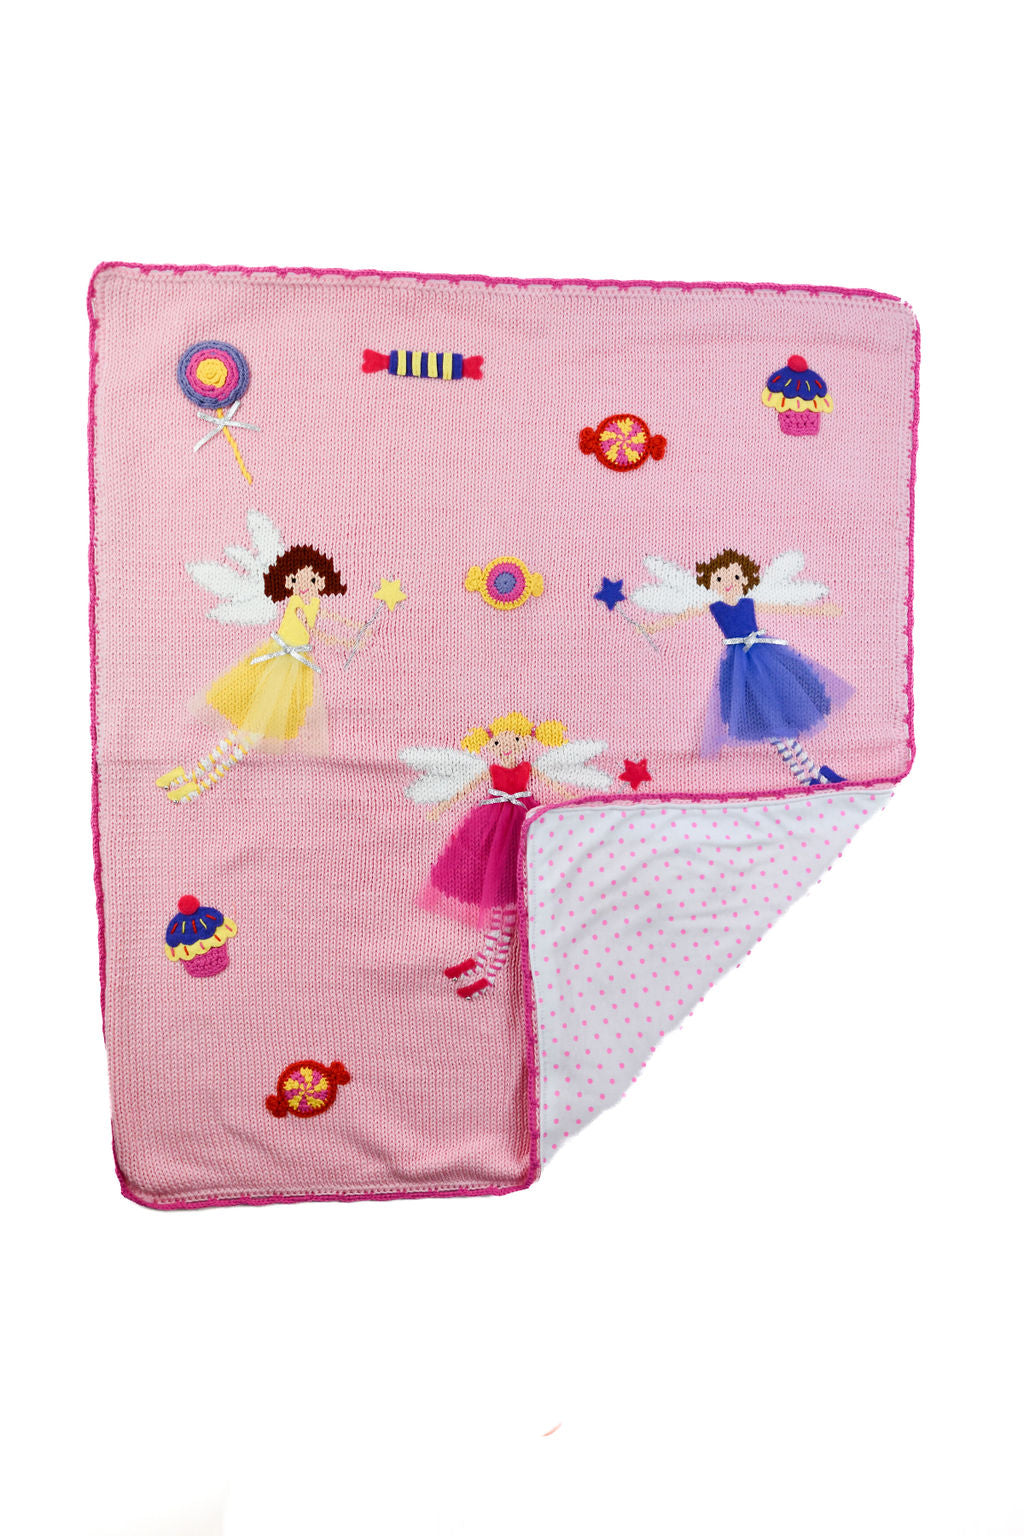 Candy Fairies Baby Blanket